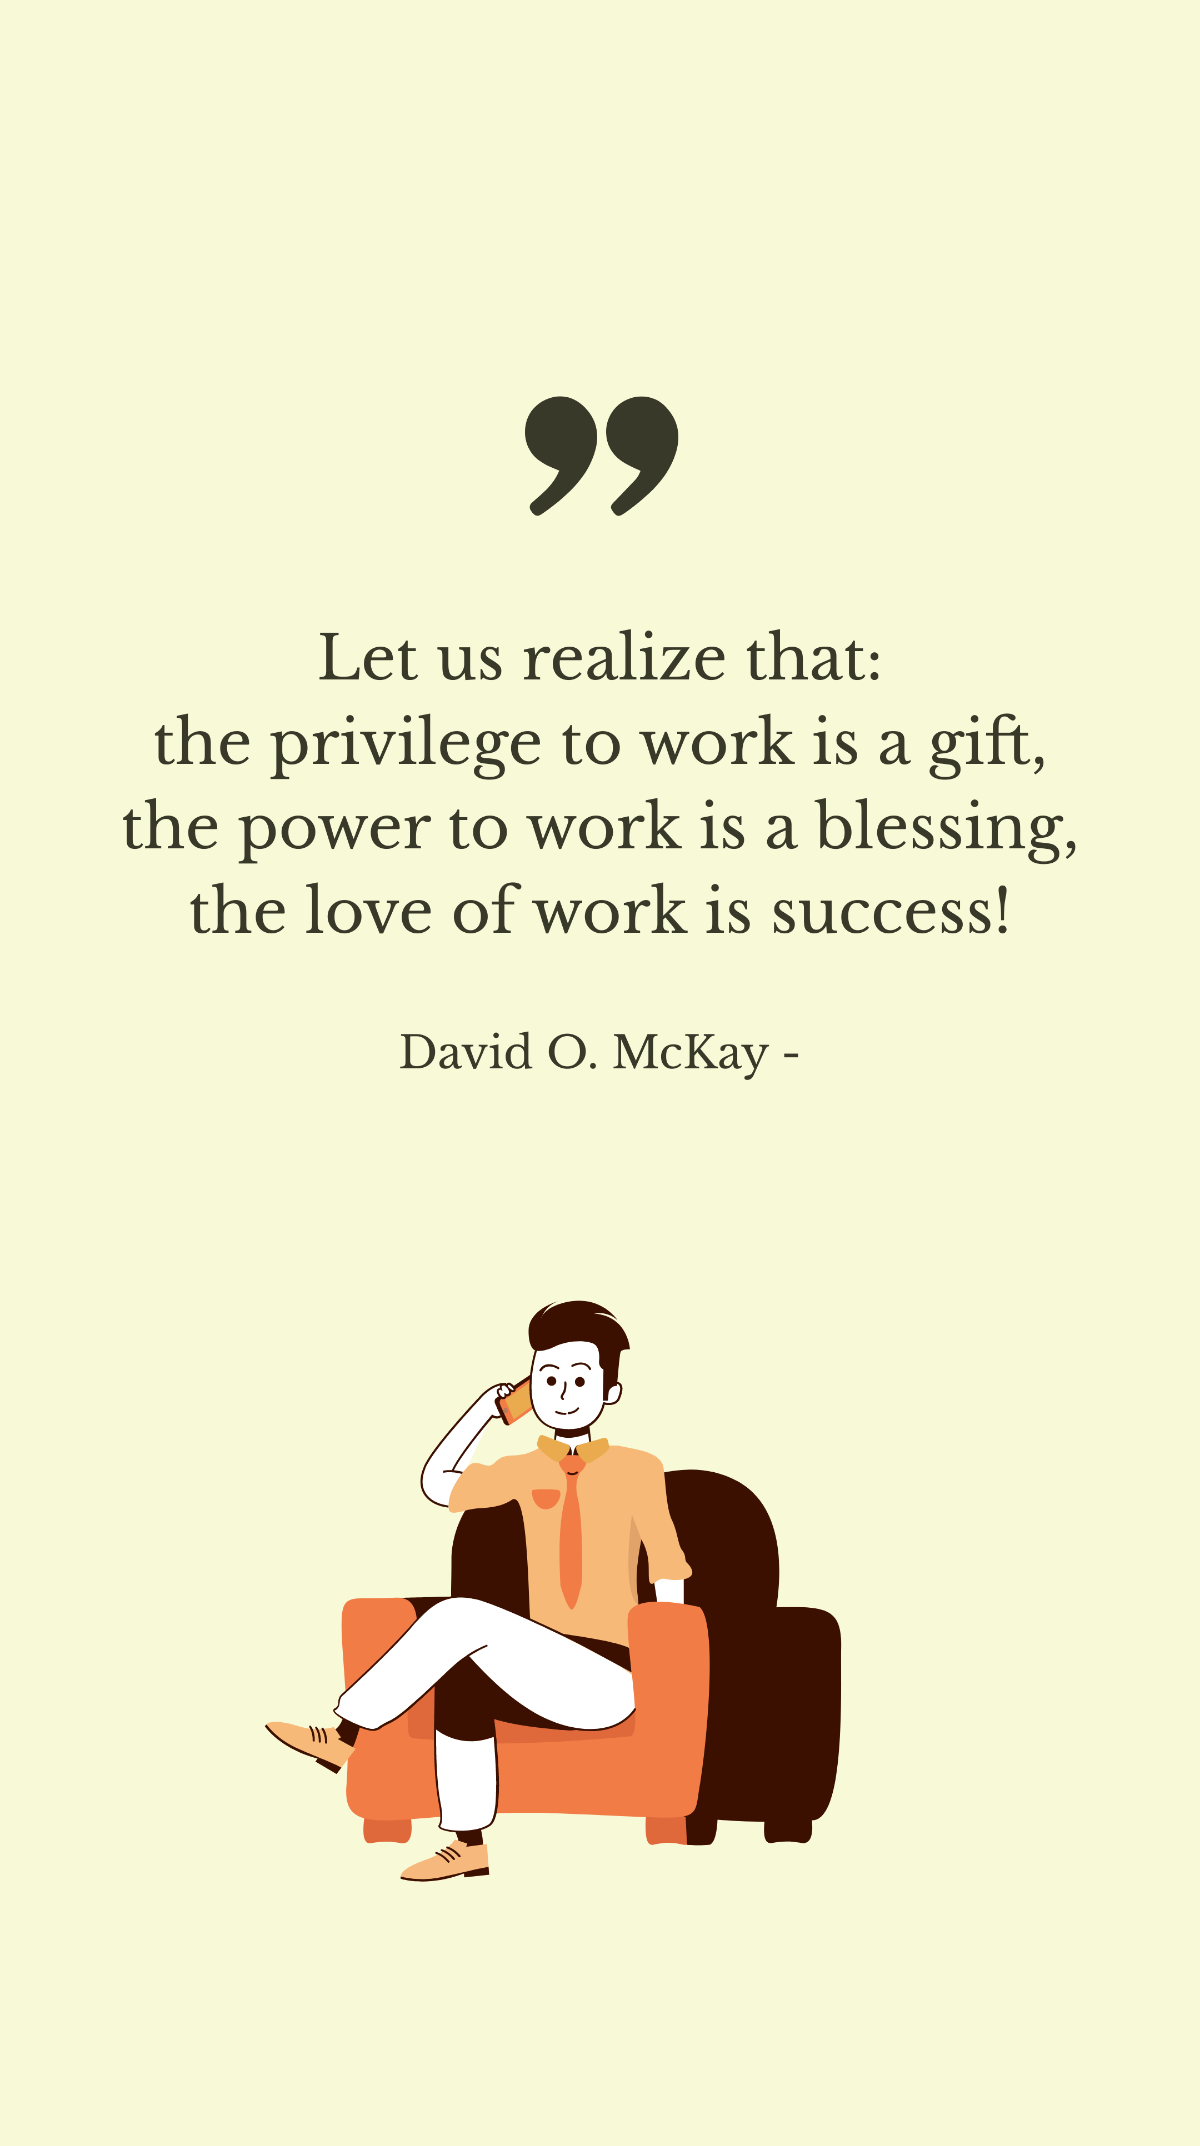 Free David O. McKay - Let us realize that: the privilege to work is a gift, the power to work is a blessing, the love of work is success! Template